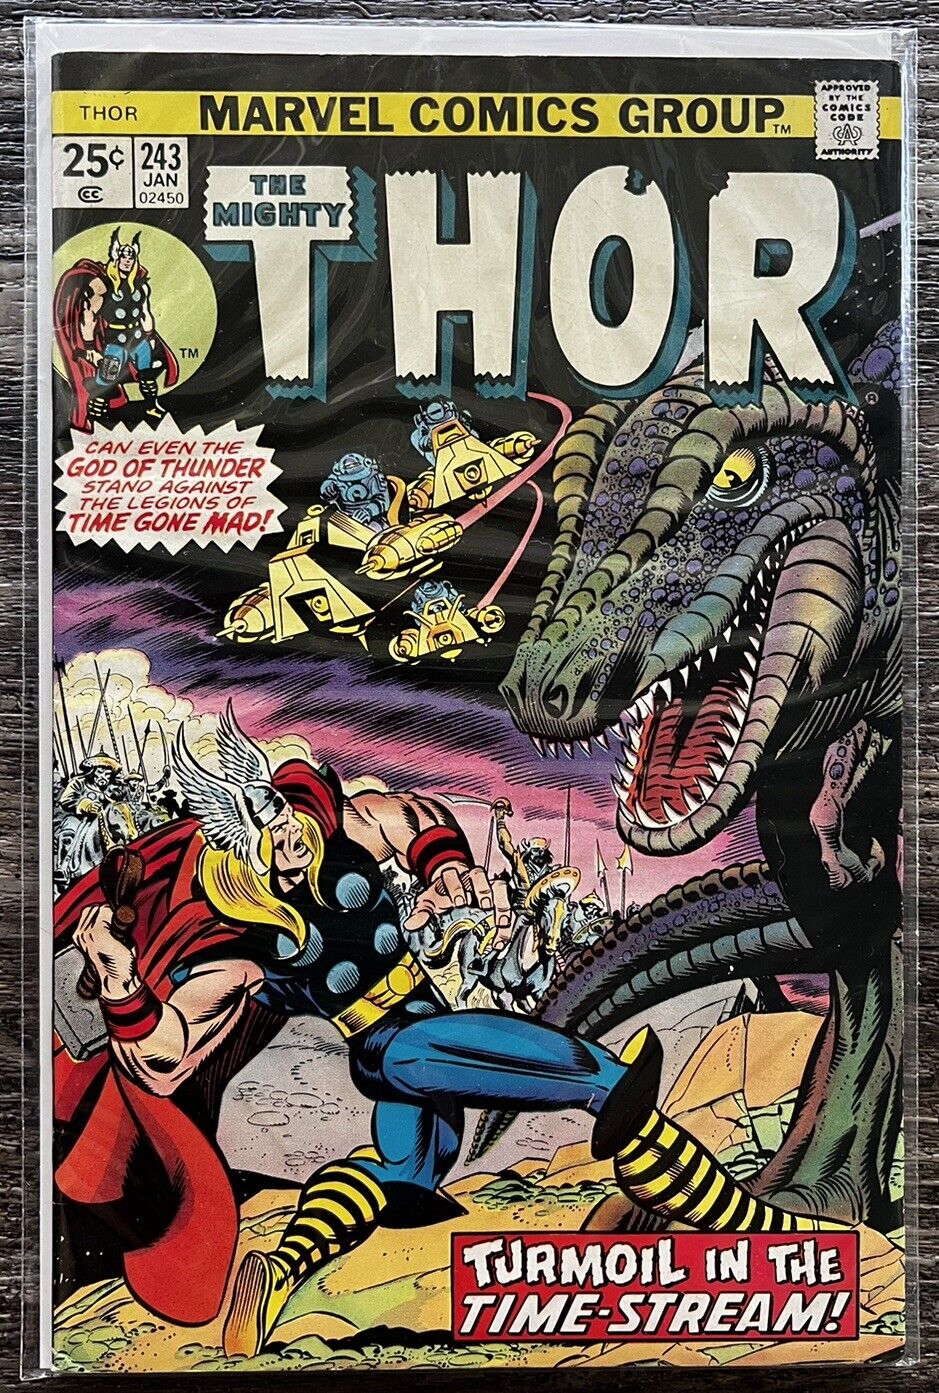 THOR #243 - Marvel Comics - 1st Time Twisters - Clean Copy  Key Issue 🔑